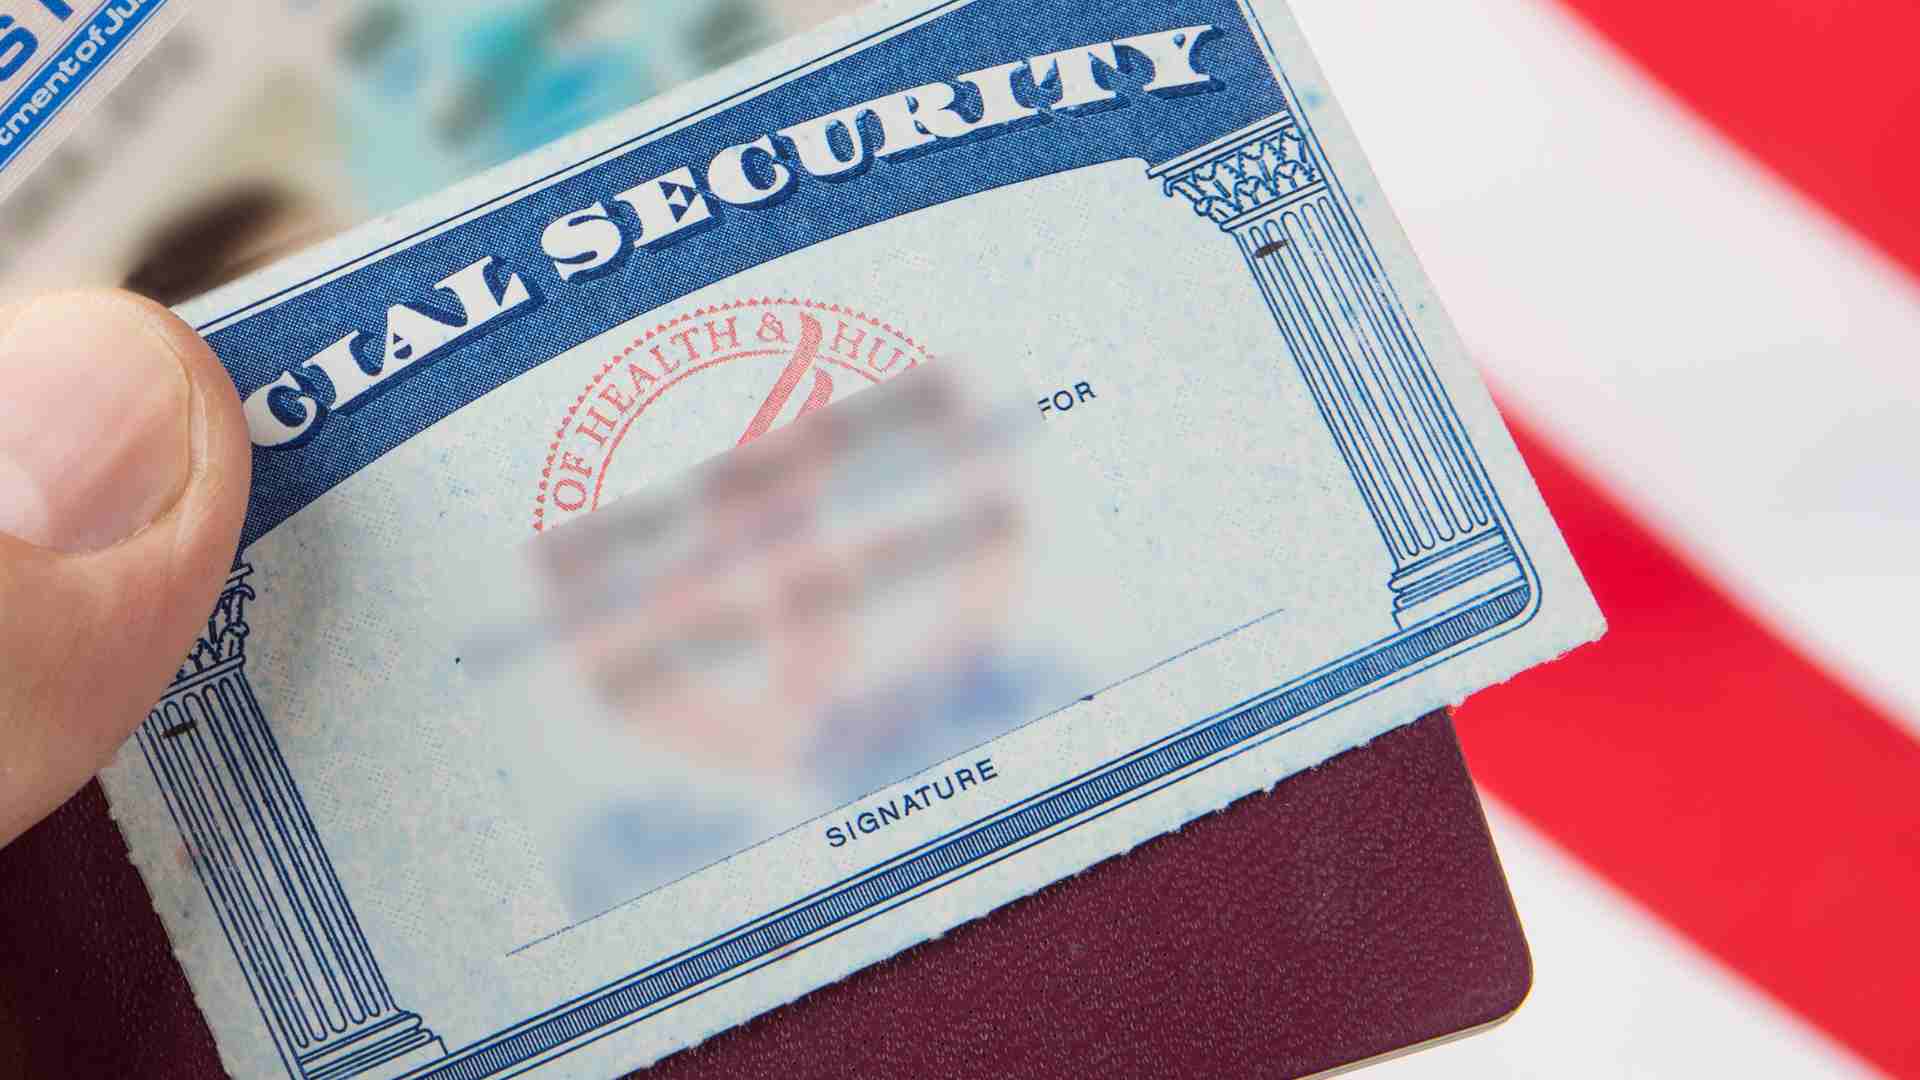 Check the eligibility for this new Social Security payment in the United States, seniors aged 62 or older and SSDI beneficiaries may qualify